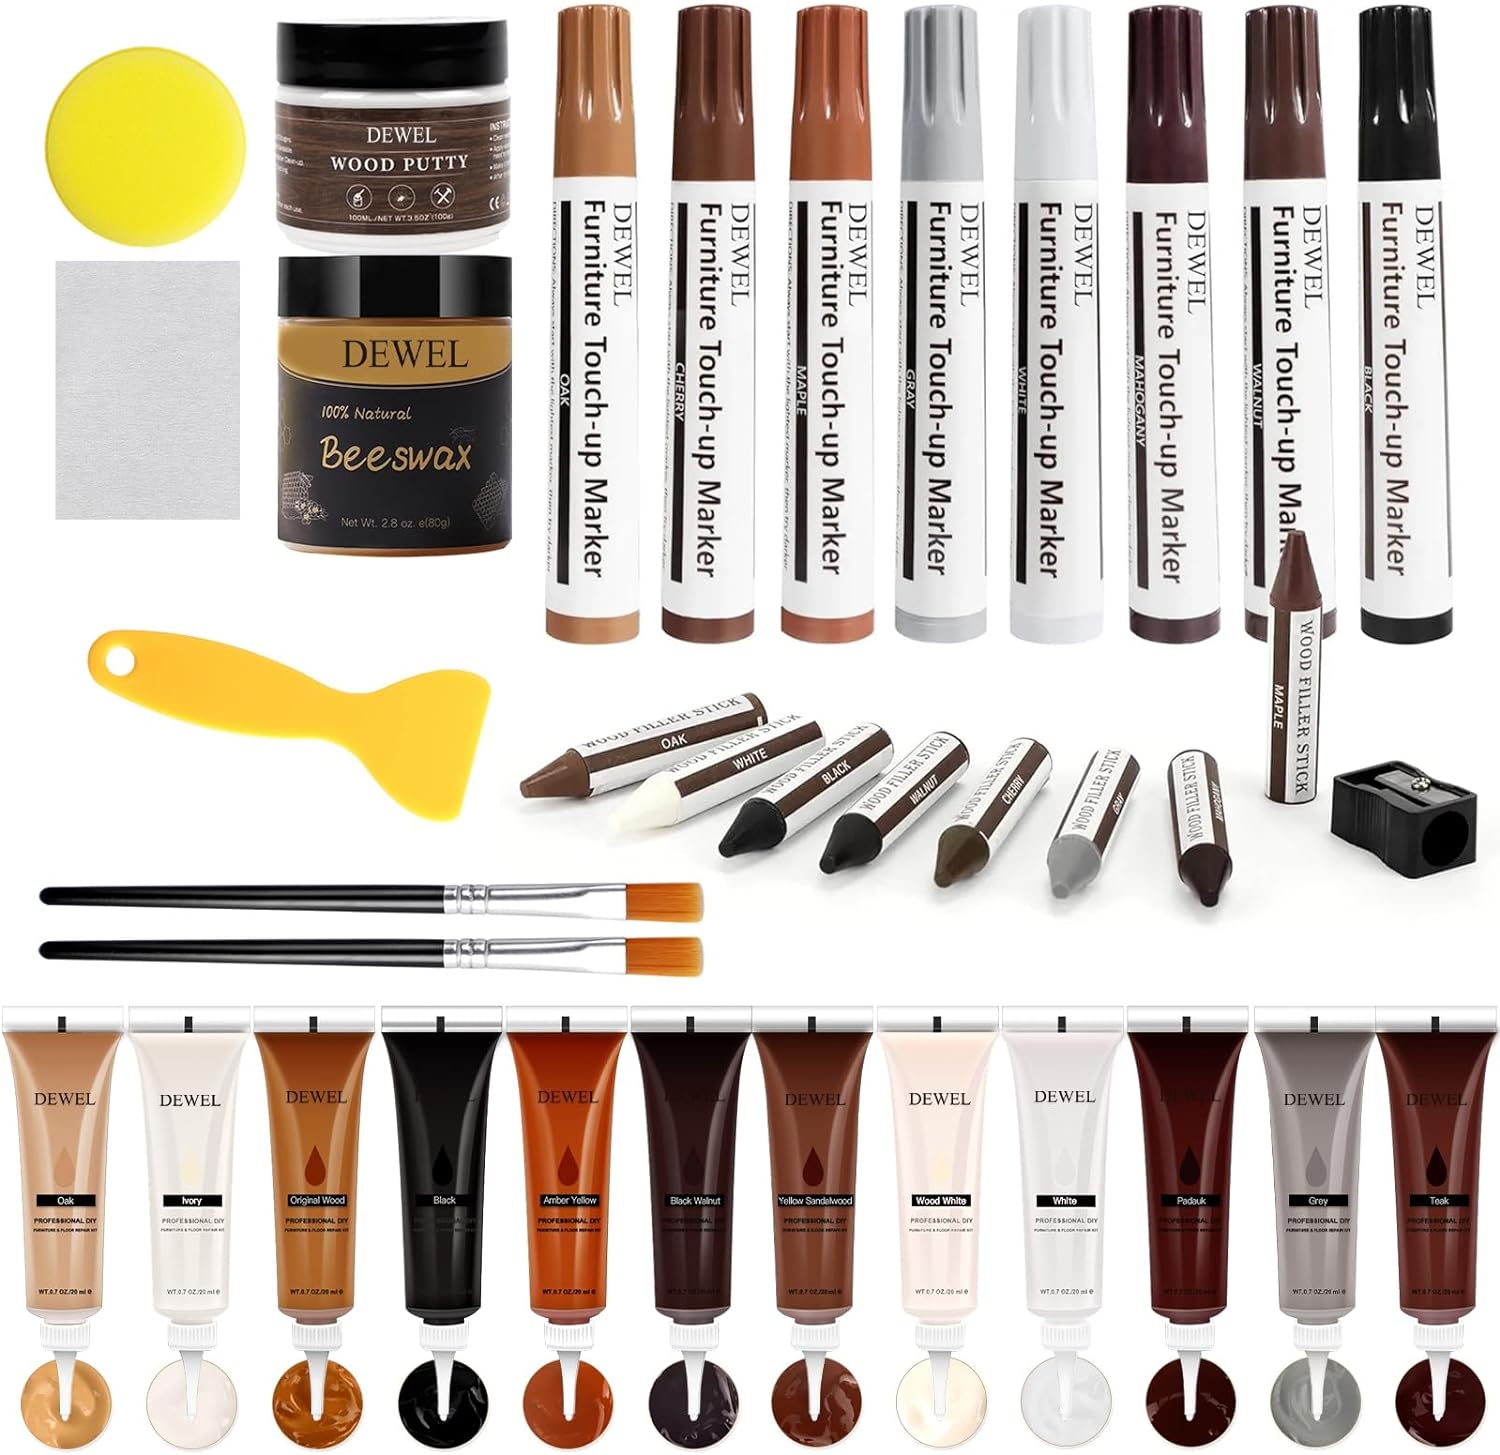 DEWEL Wood Furniture Repair Kit, New Upgrade Wood Fillers, Furniture Touch Up Markers, Wax Sticks, Wood Putty with Beeswax for Cracks, Wood Hole, Scratches, Floor, Table, Door